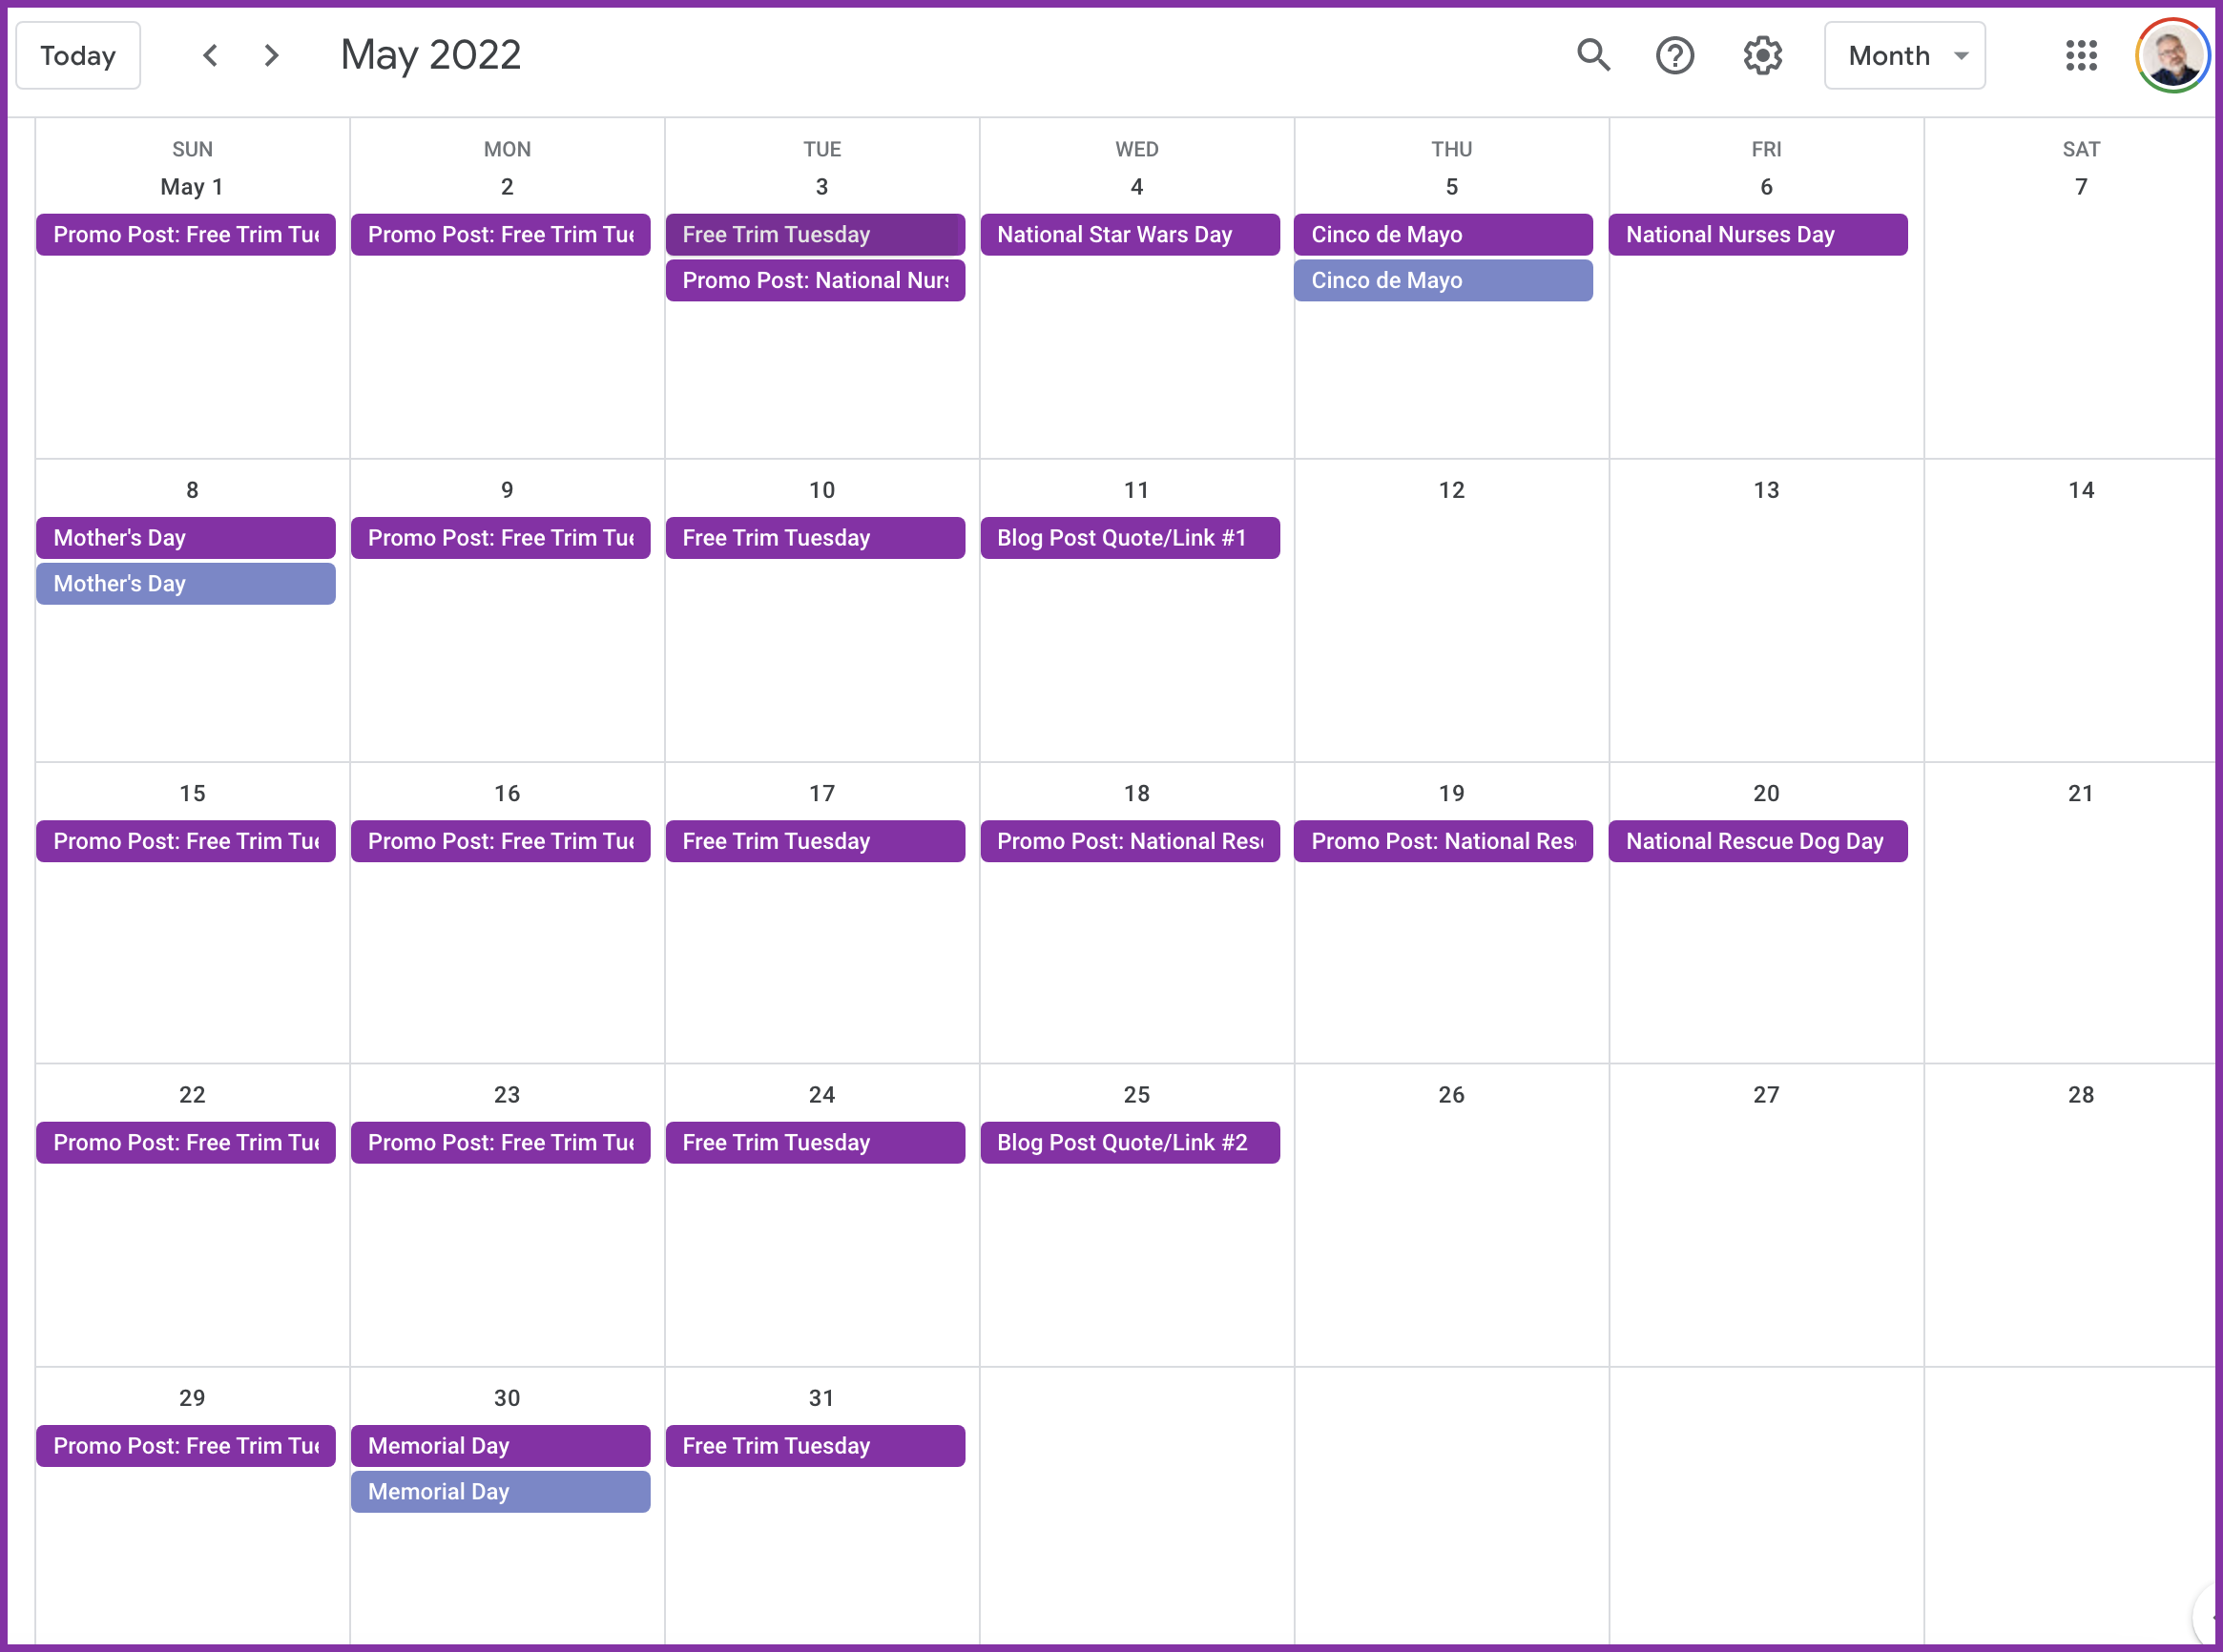 Adding national celebration days and themed days to your social media content calendar